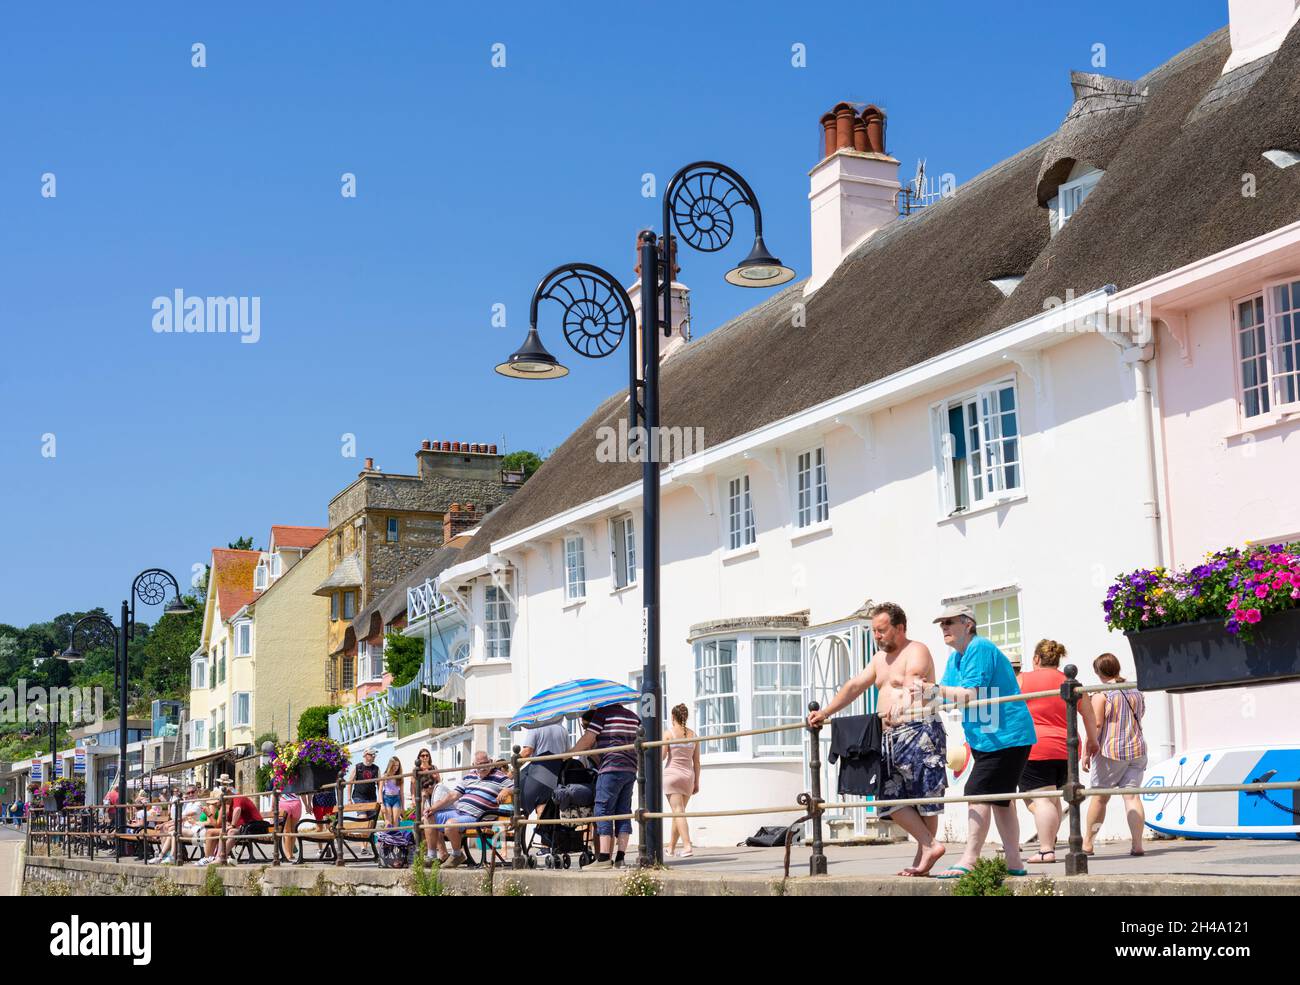 people walking on the promenade at Marine Parade seafront overlooking the sandy beach at Lyme Regis Dorset England UK GB Europe Stock Photo